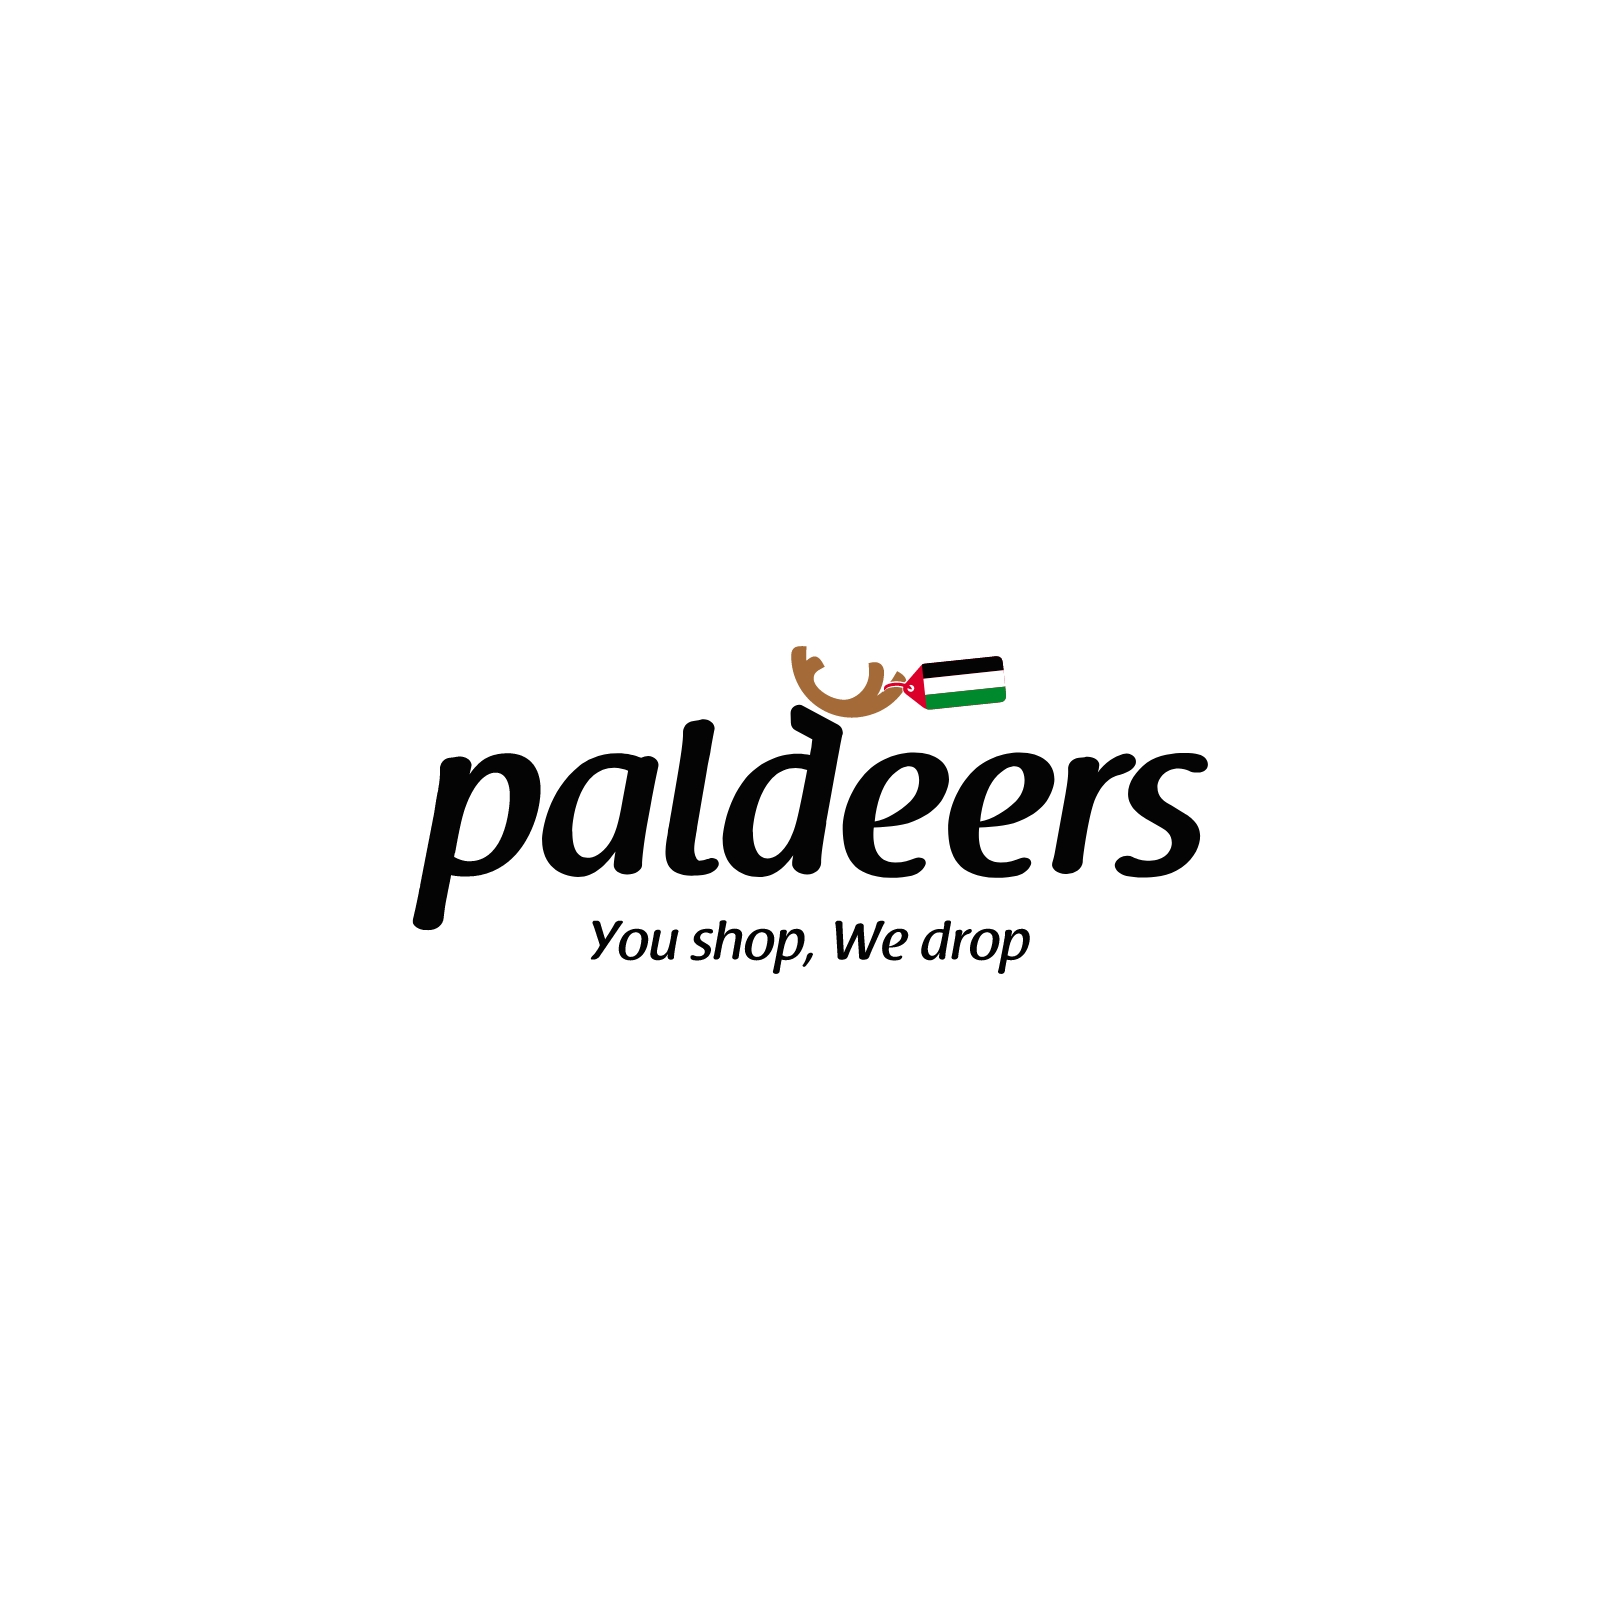 Designing a logo for Paldears